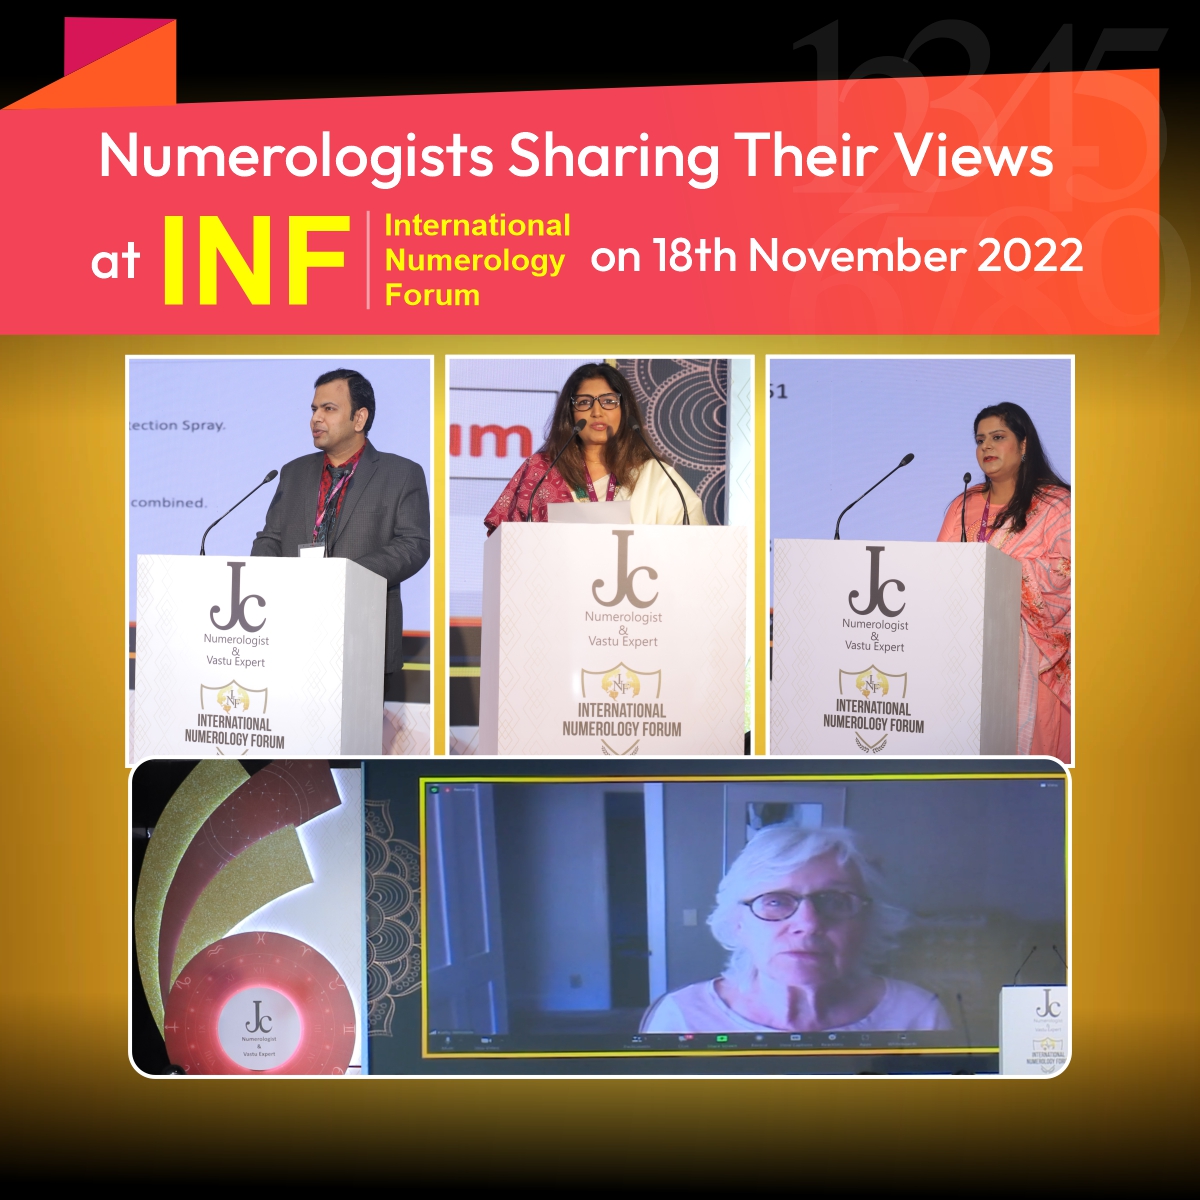 Member Numerologists of INF from India, USA, Australia and UAE